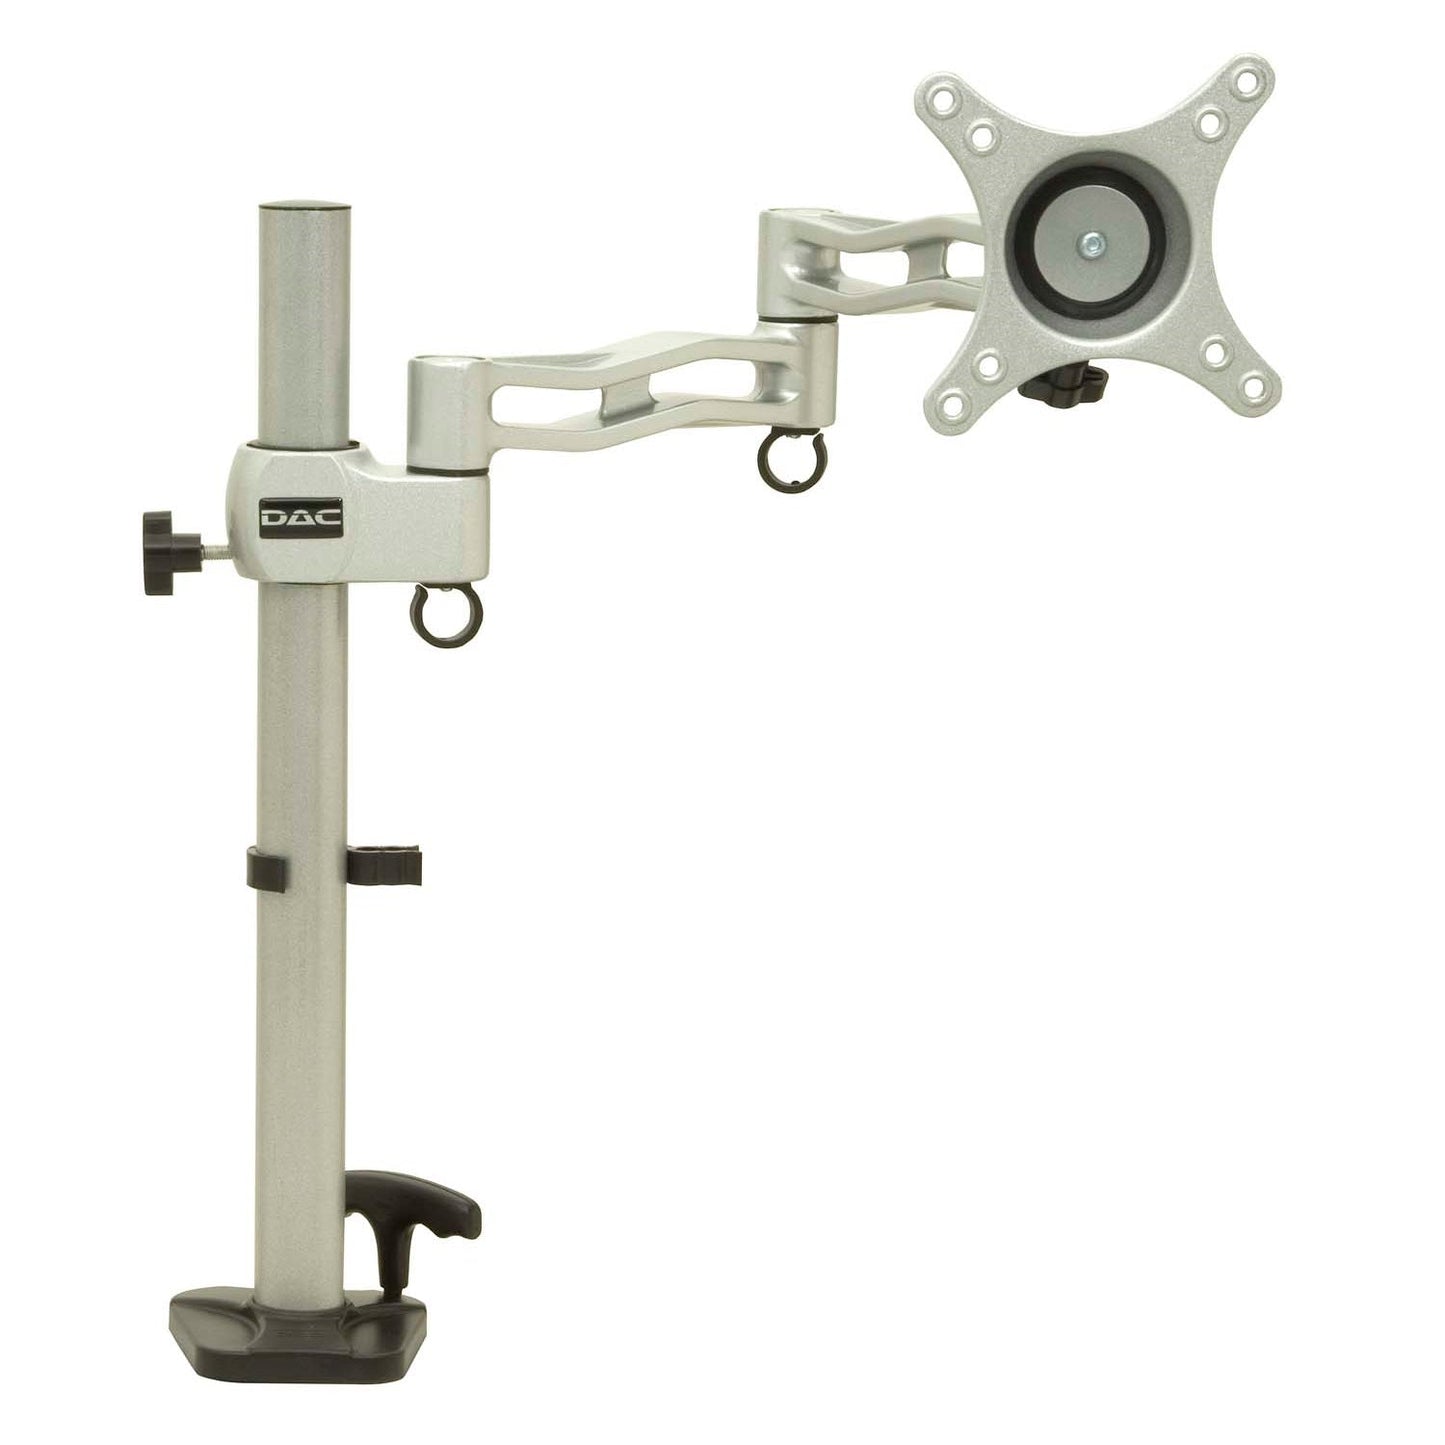 DAC® MP-199 Height Adjustable Articulating Single Monitor Arm, Silver